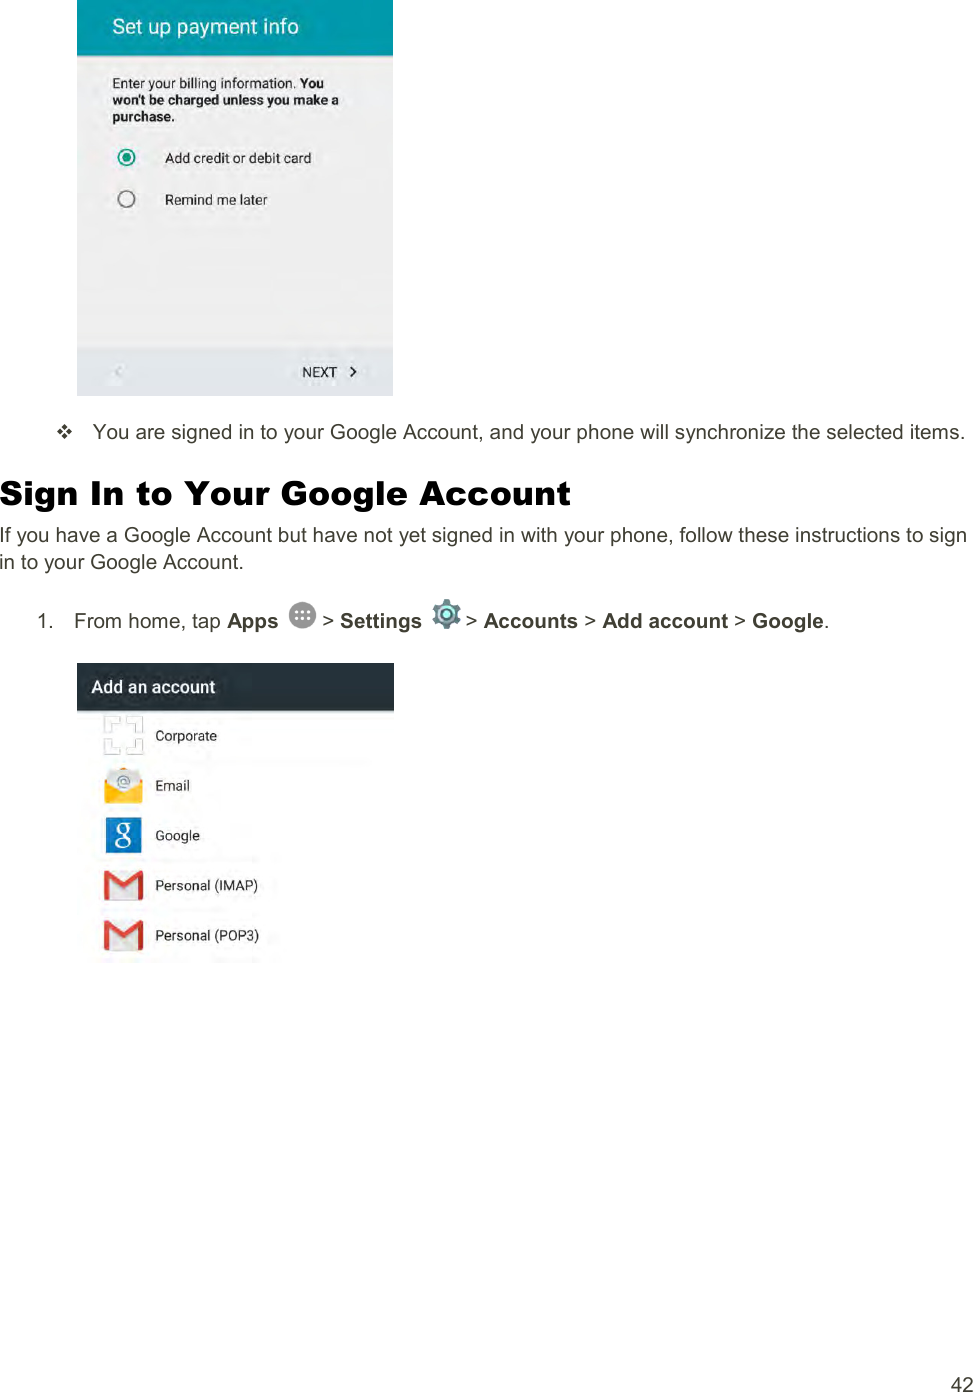  42     You are signed in to your Google Account, and your phone will synchronize the selected items. Sign In to Your Google Account If you have a Google Account but have not yet signed in with your phone, follow these instructions to sign in to your Google Account. 1.  From home, tap Apps   &gt; Settings   &gt; Accounts &gt; Add account &gt; Google.   